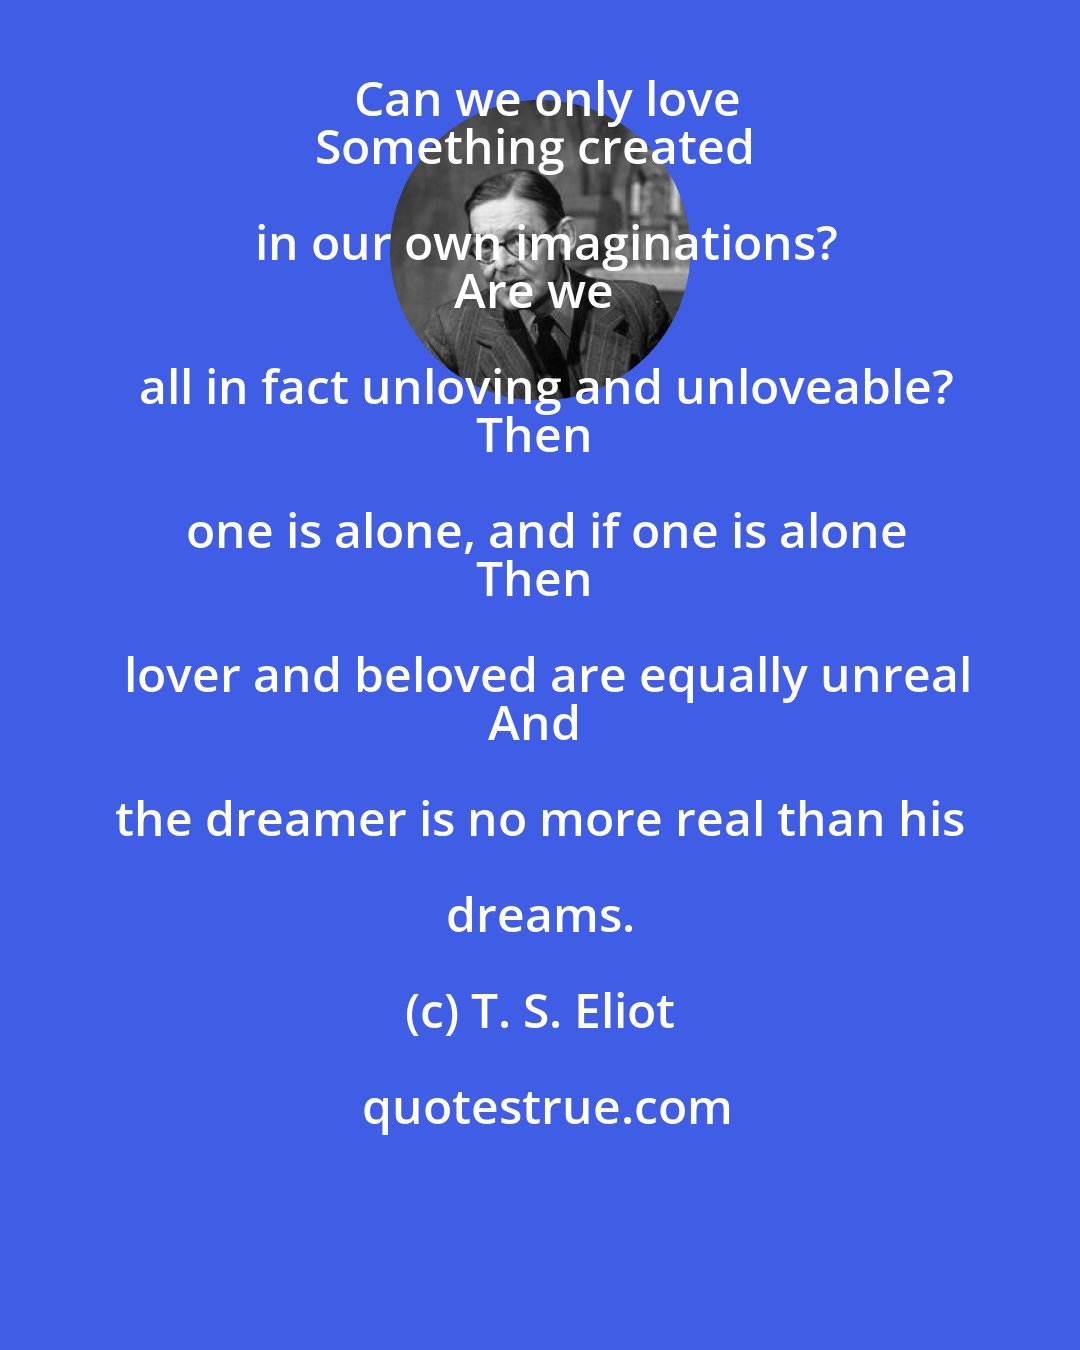 T. S. Eliot: Can we only love
Something created in our own imaginations?
Are we all in fact unloving and unloveable?
Then one is alone, and if one is alone
Then lover and beloved are equally unreal
And the dreamer is no more real than his dreams.